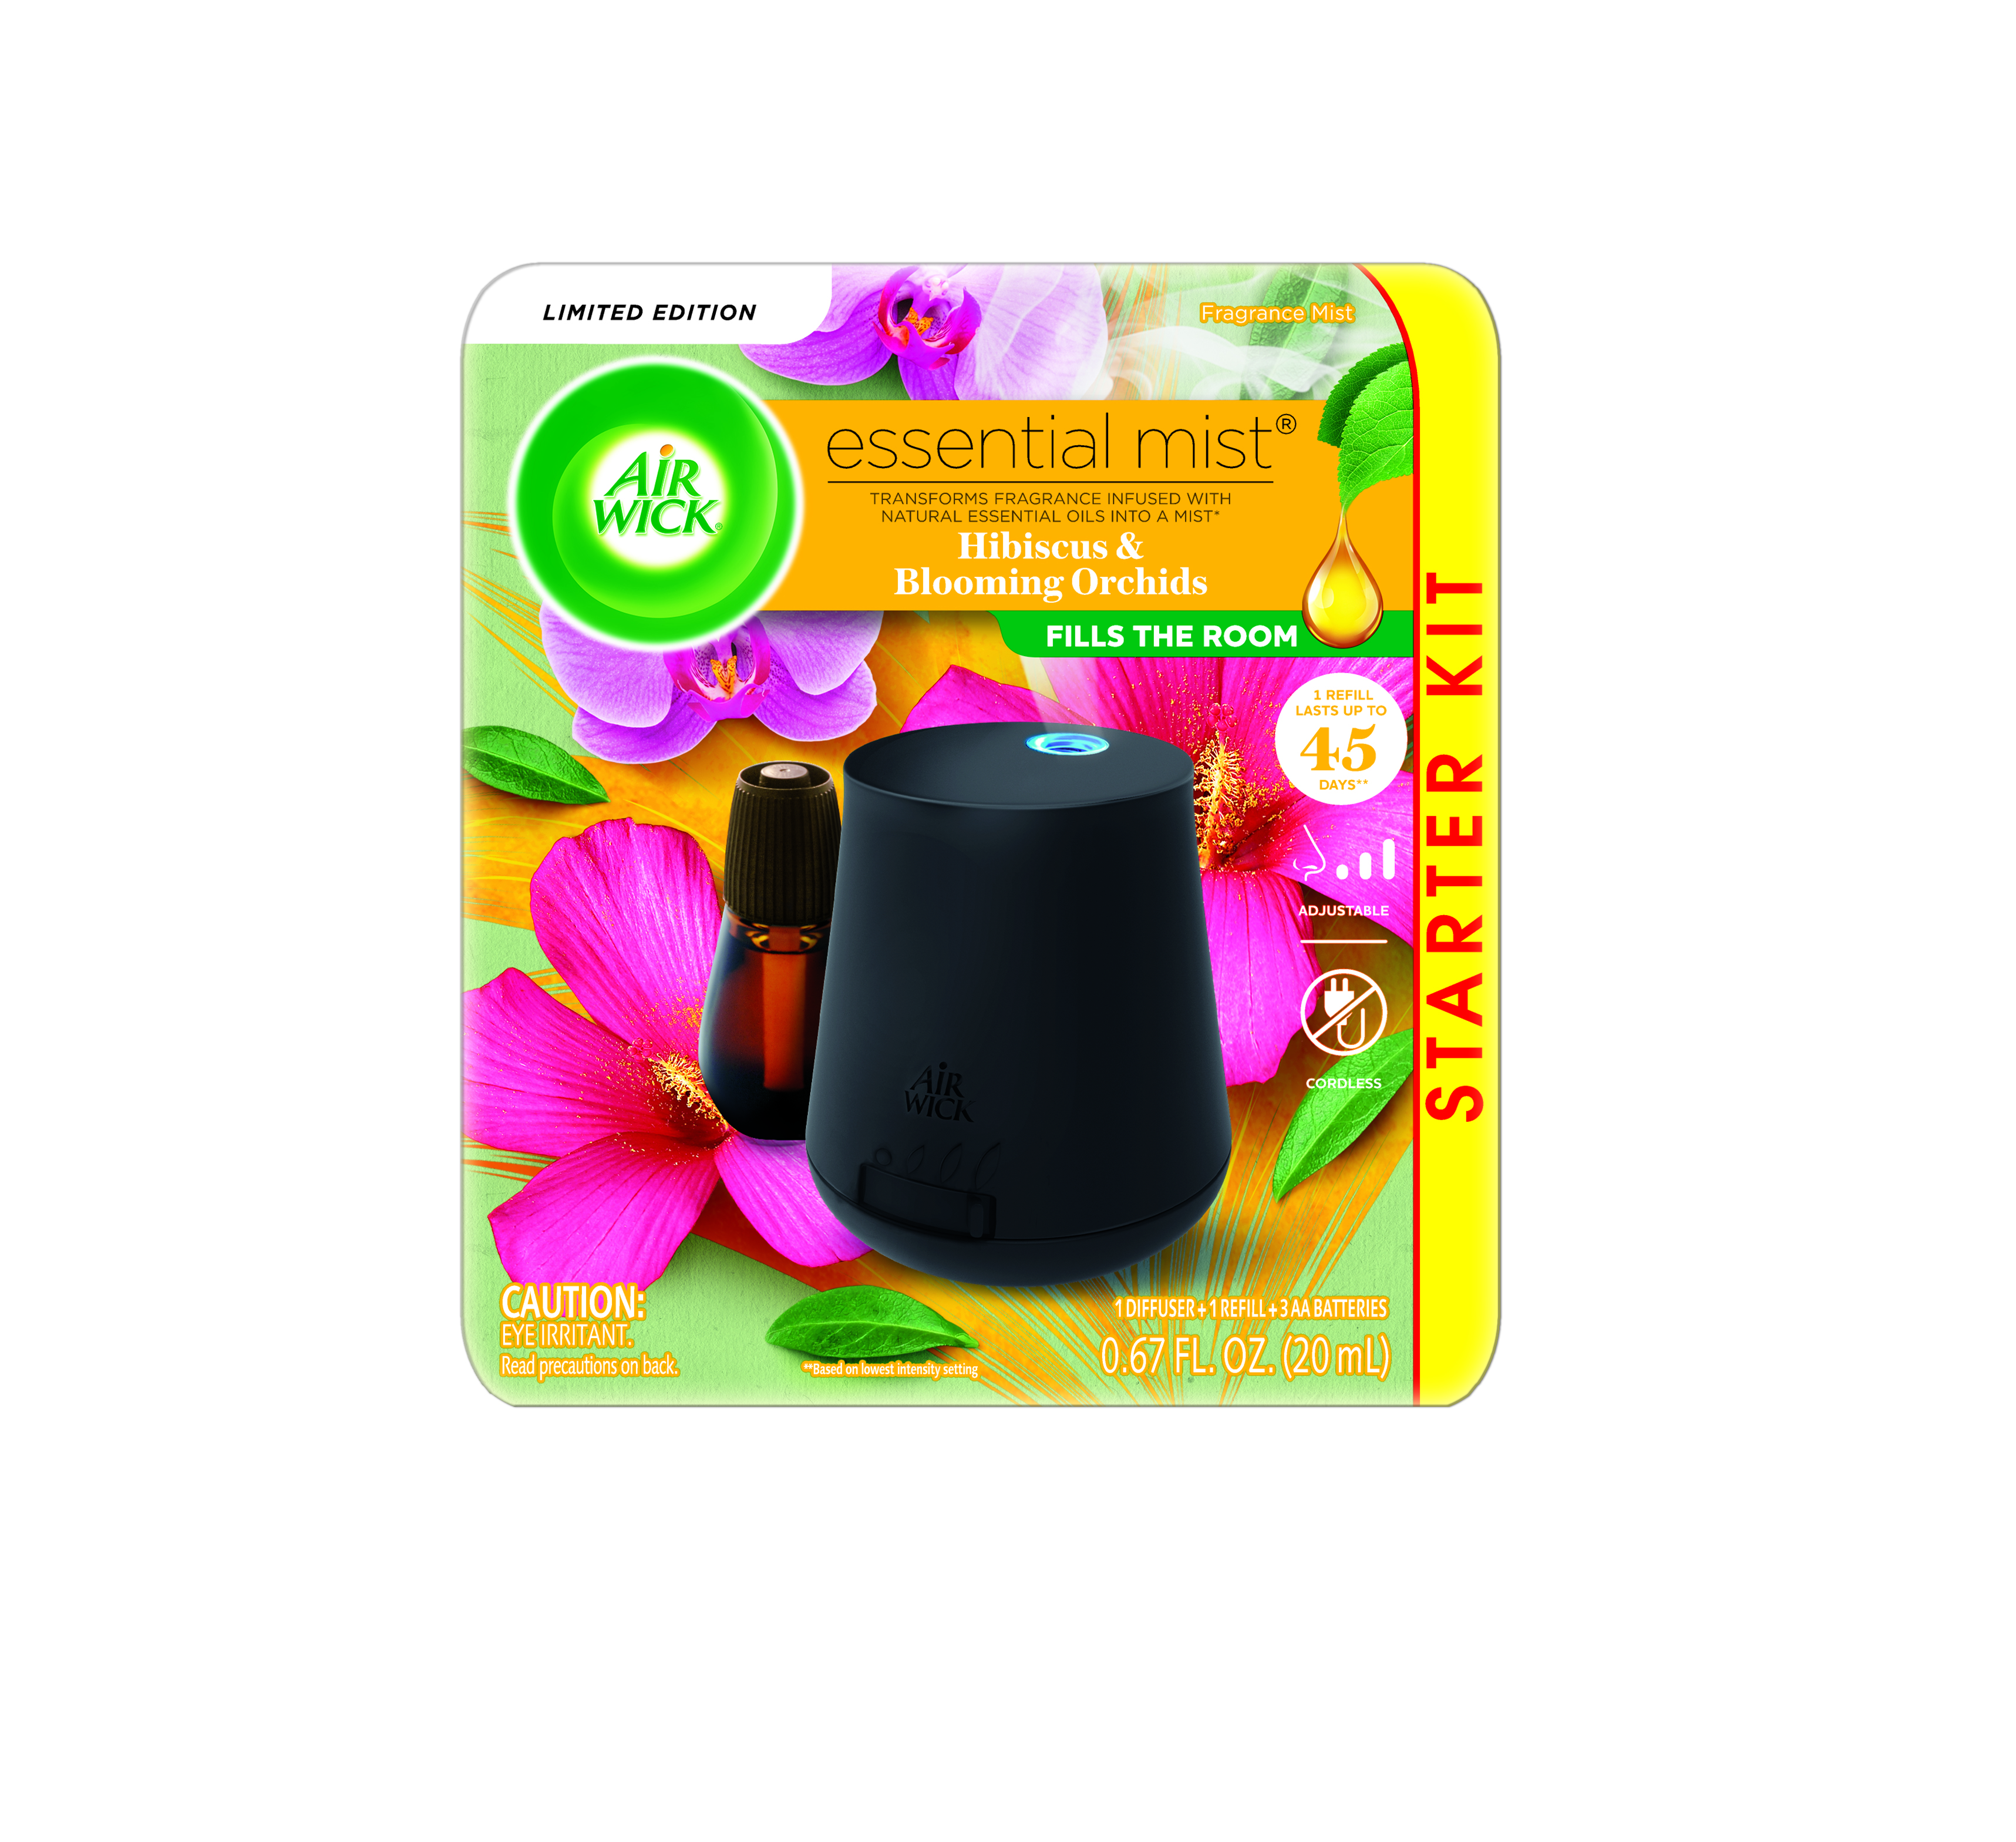 AIR WICK® Essential Mist - Hibiscus & Blooming Orchids - Kit - (Discontinued)